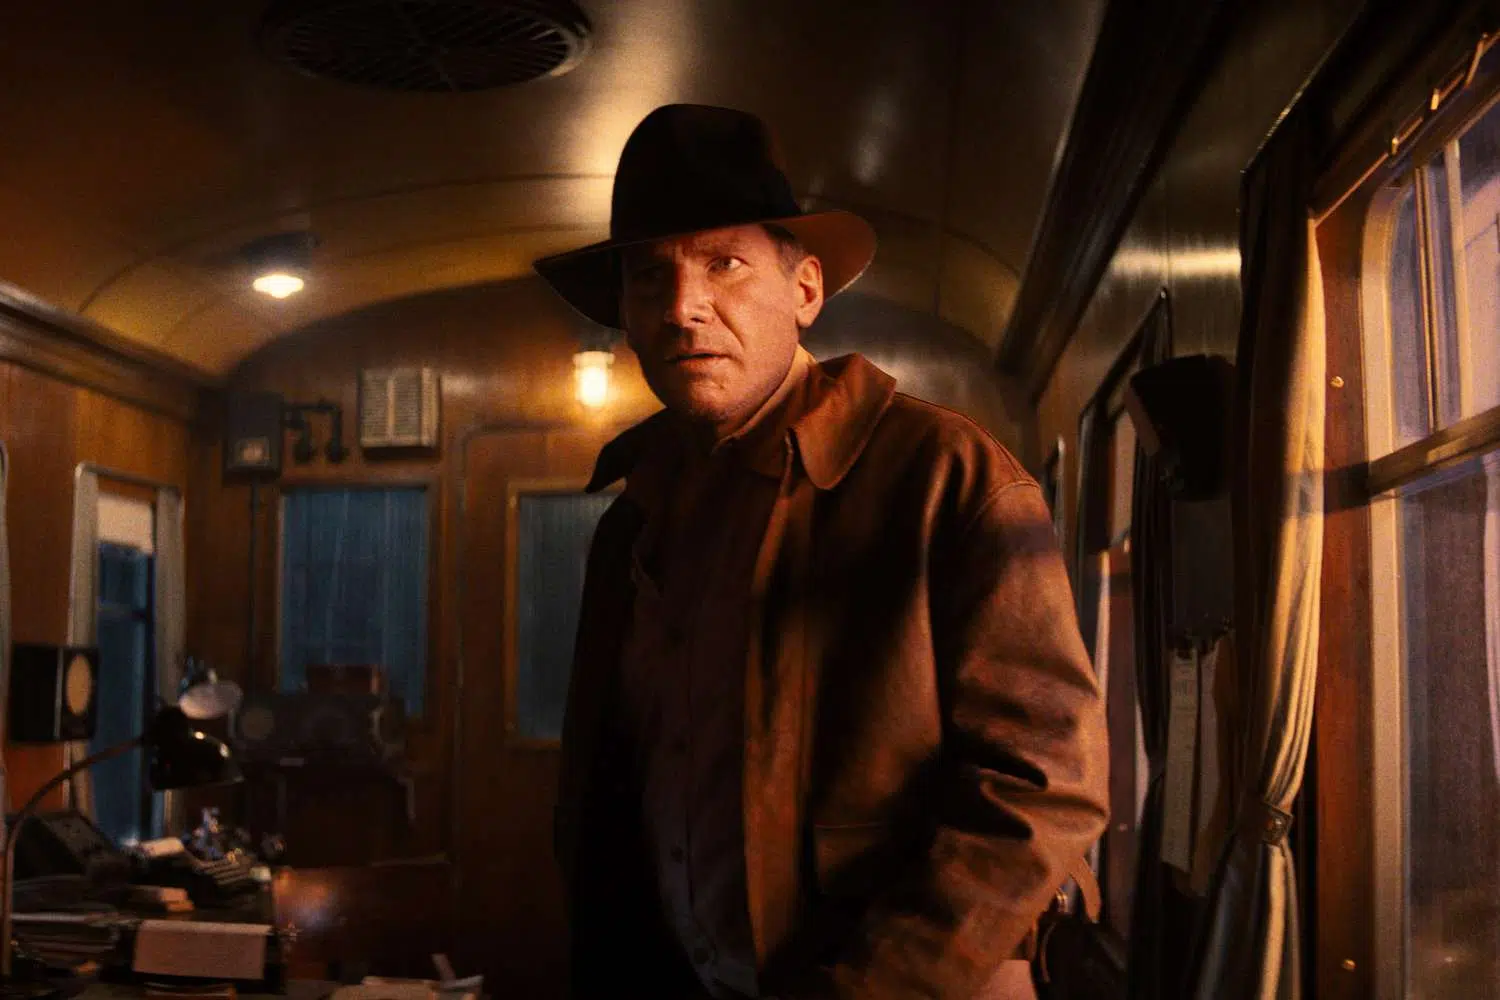 (Watch) Official Trailer for "Indiana Jones and the Dial of Destiny"